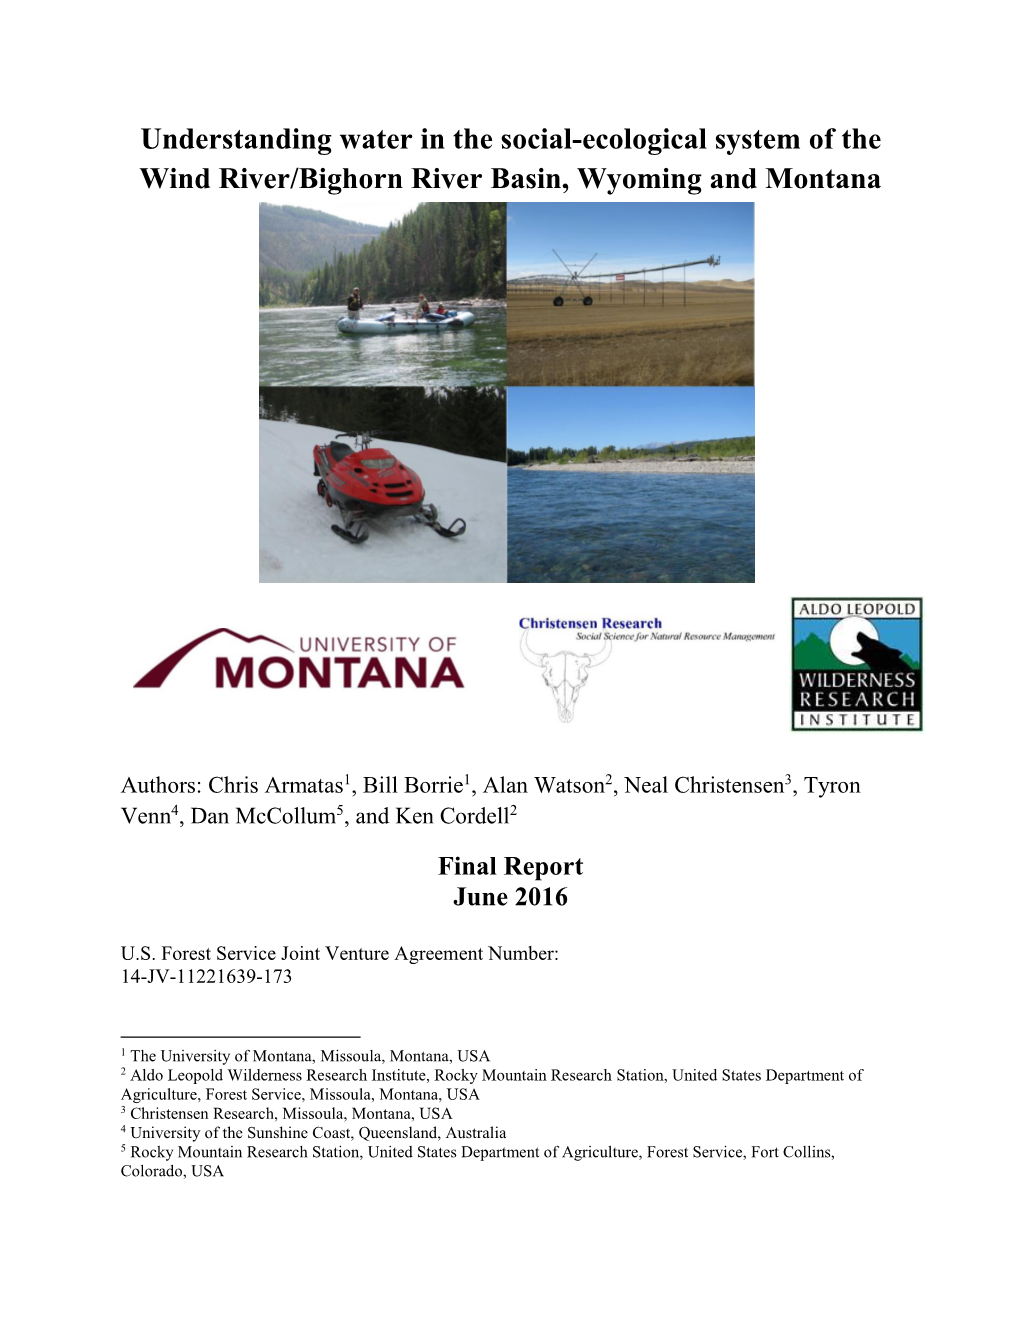 Understanding Water in the Social-Ecological System of the Wind River/Bighorn River Basin, Wyoming and Montana